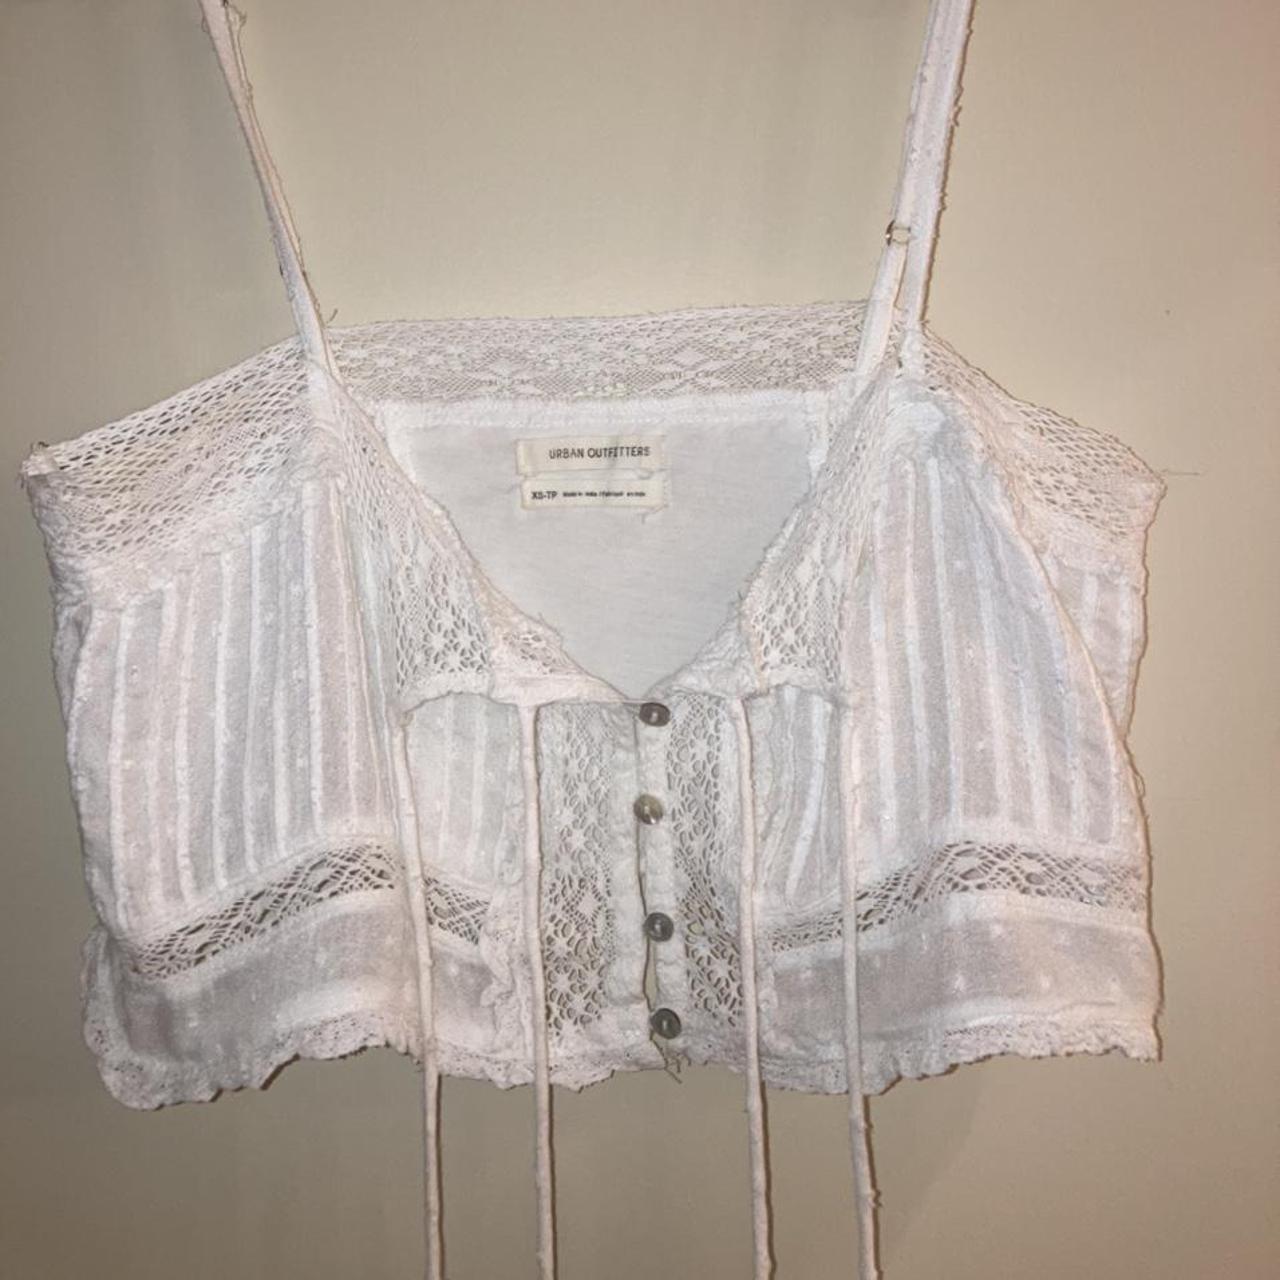 Urban outfitters white lace crop top Boho chic Uk... - Depop